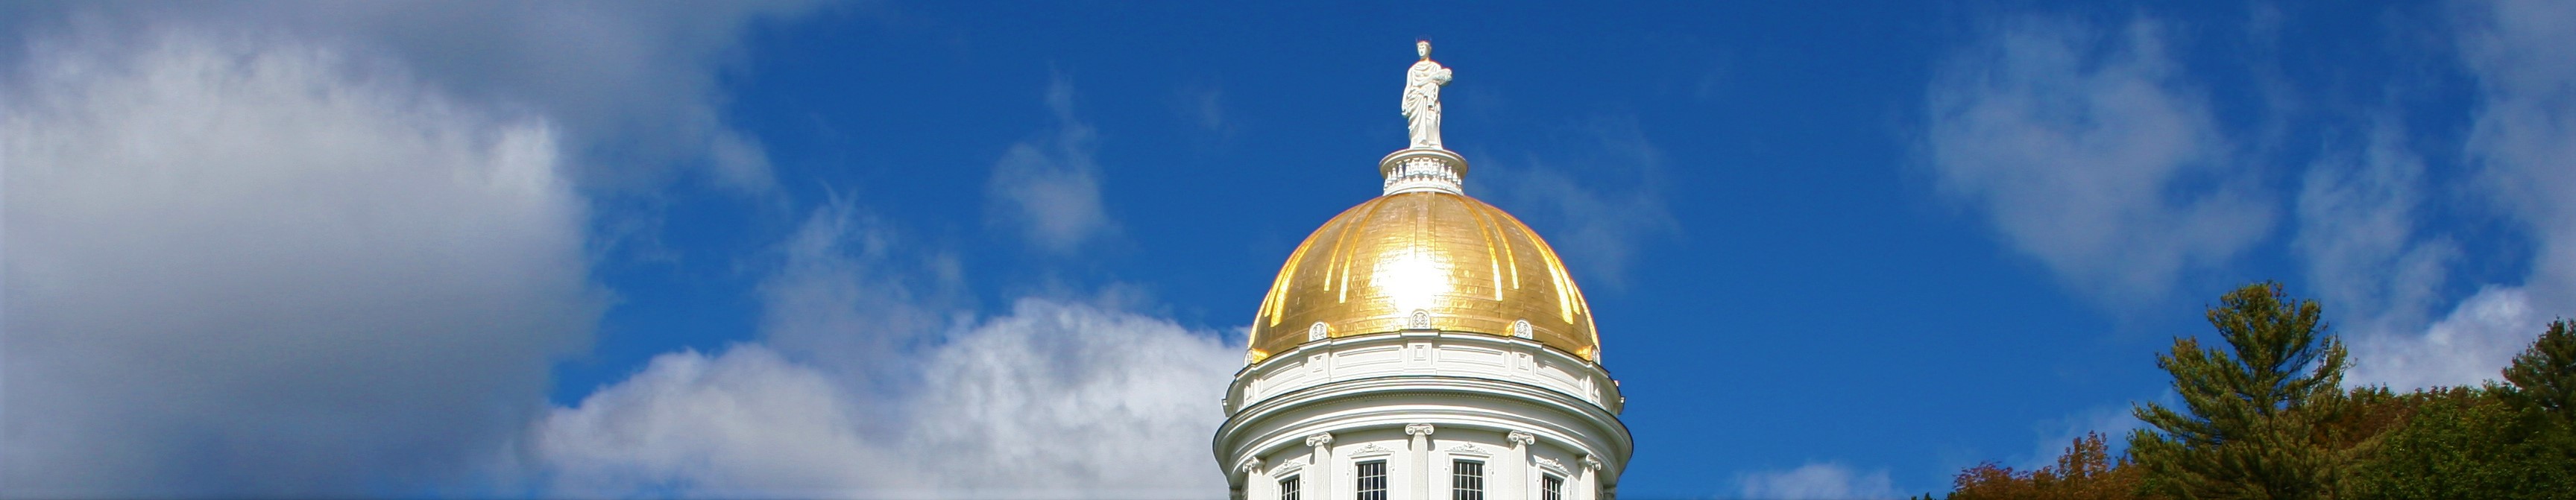 Dome of Vermont State Capital Building 